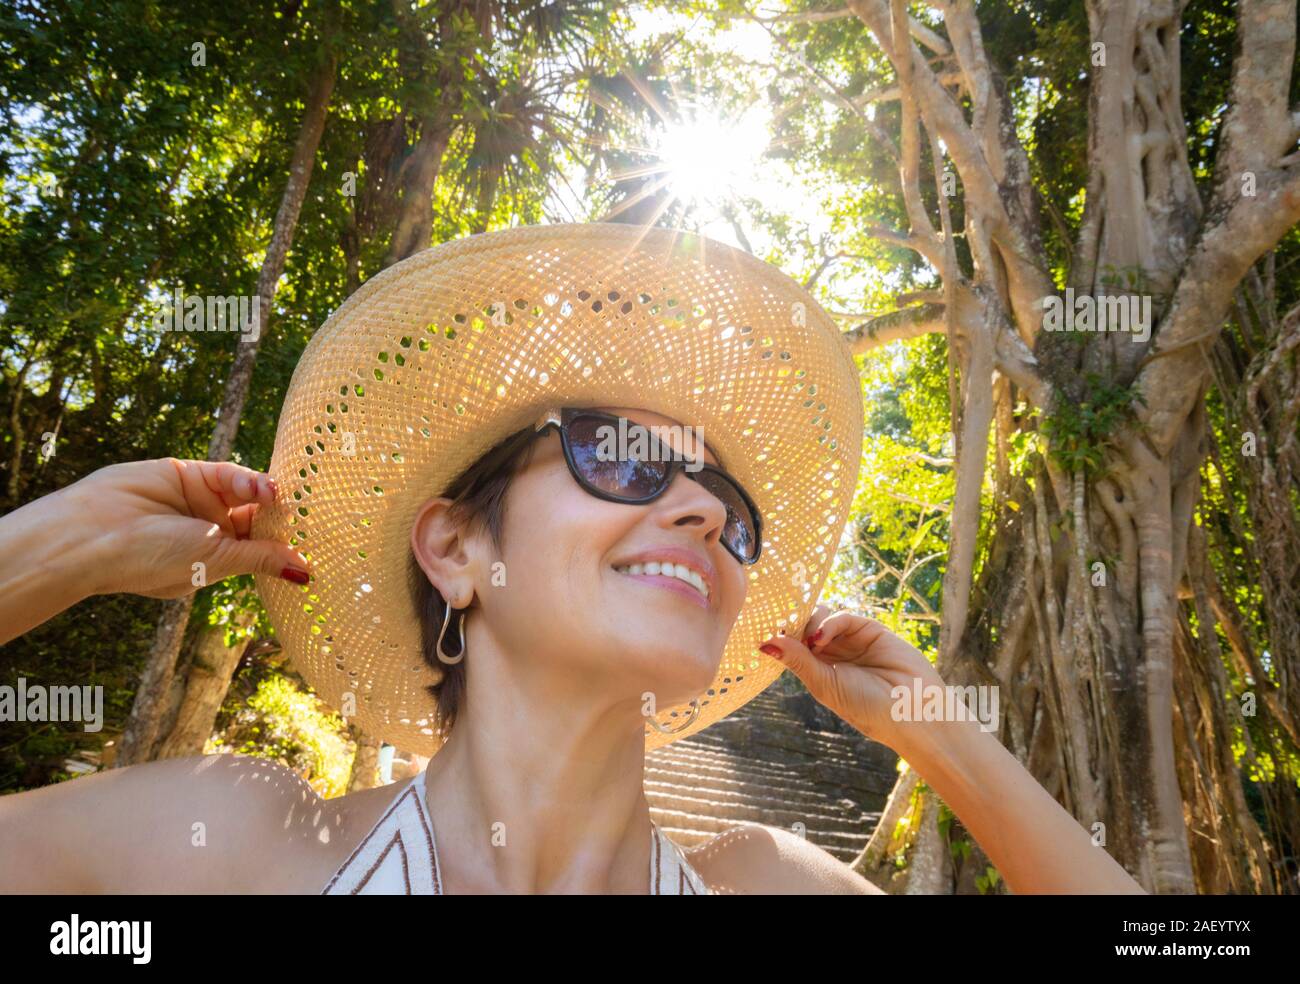 A female tourist at the Mayan ruins of Chaacchoben, Quintana Roo, Mexico. Stock Photo